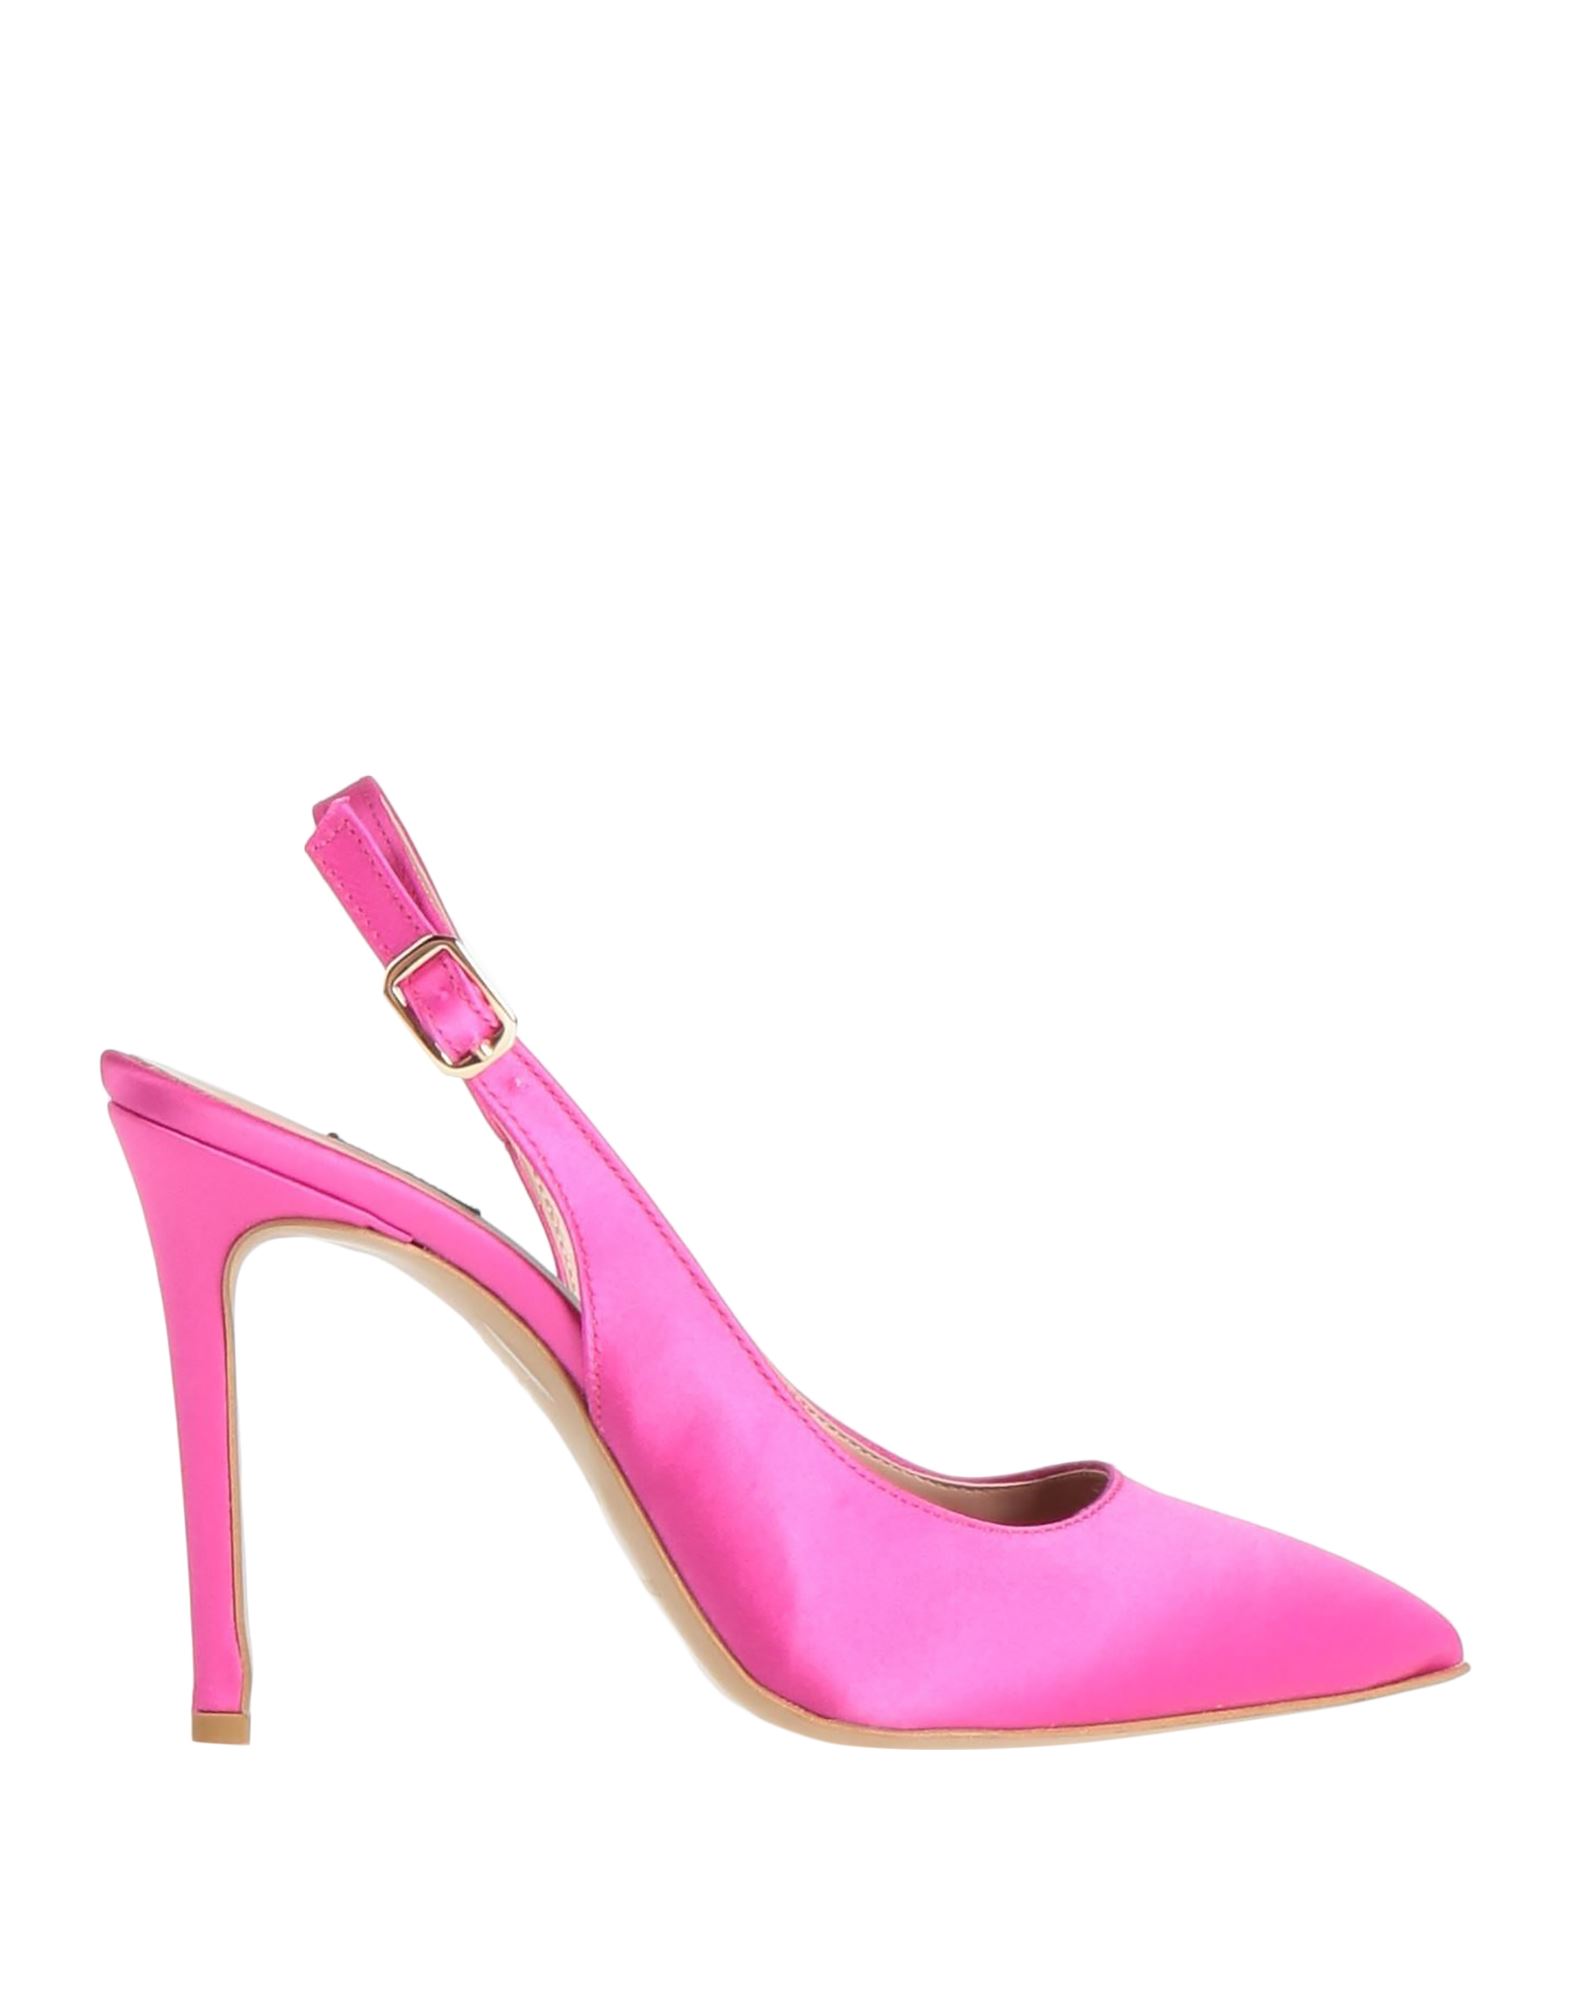 Islo Isabella Lorusso Pumps In Pink | ModeSens